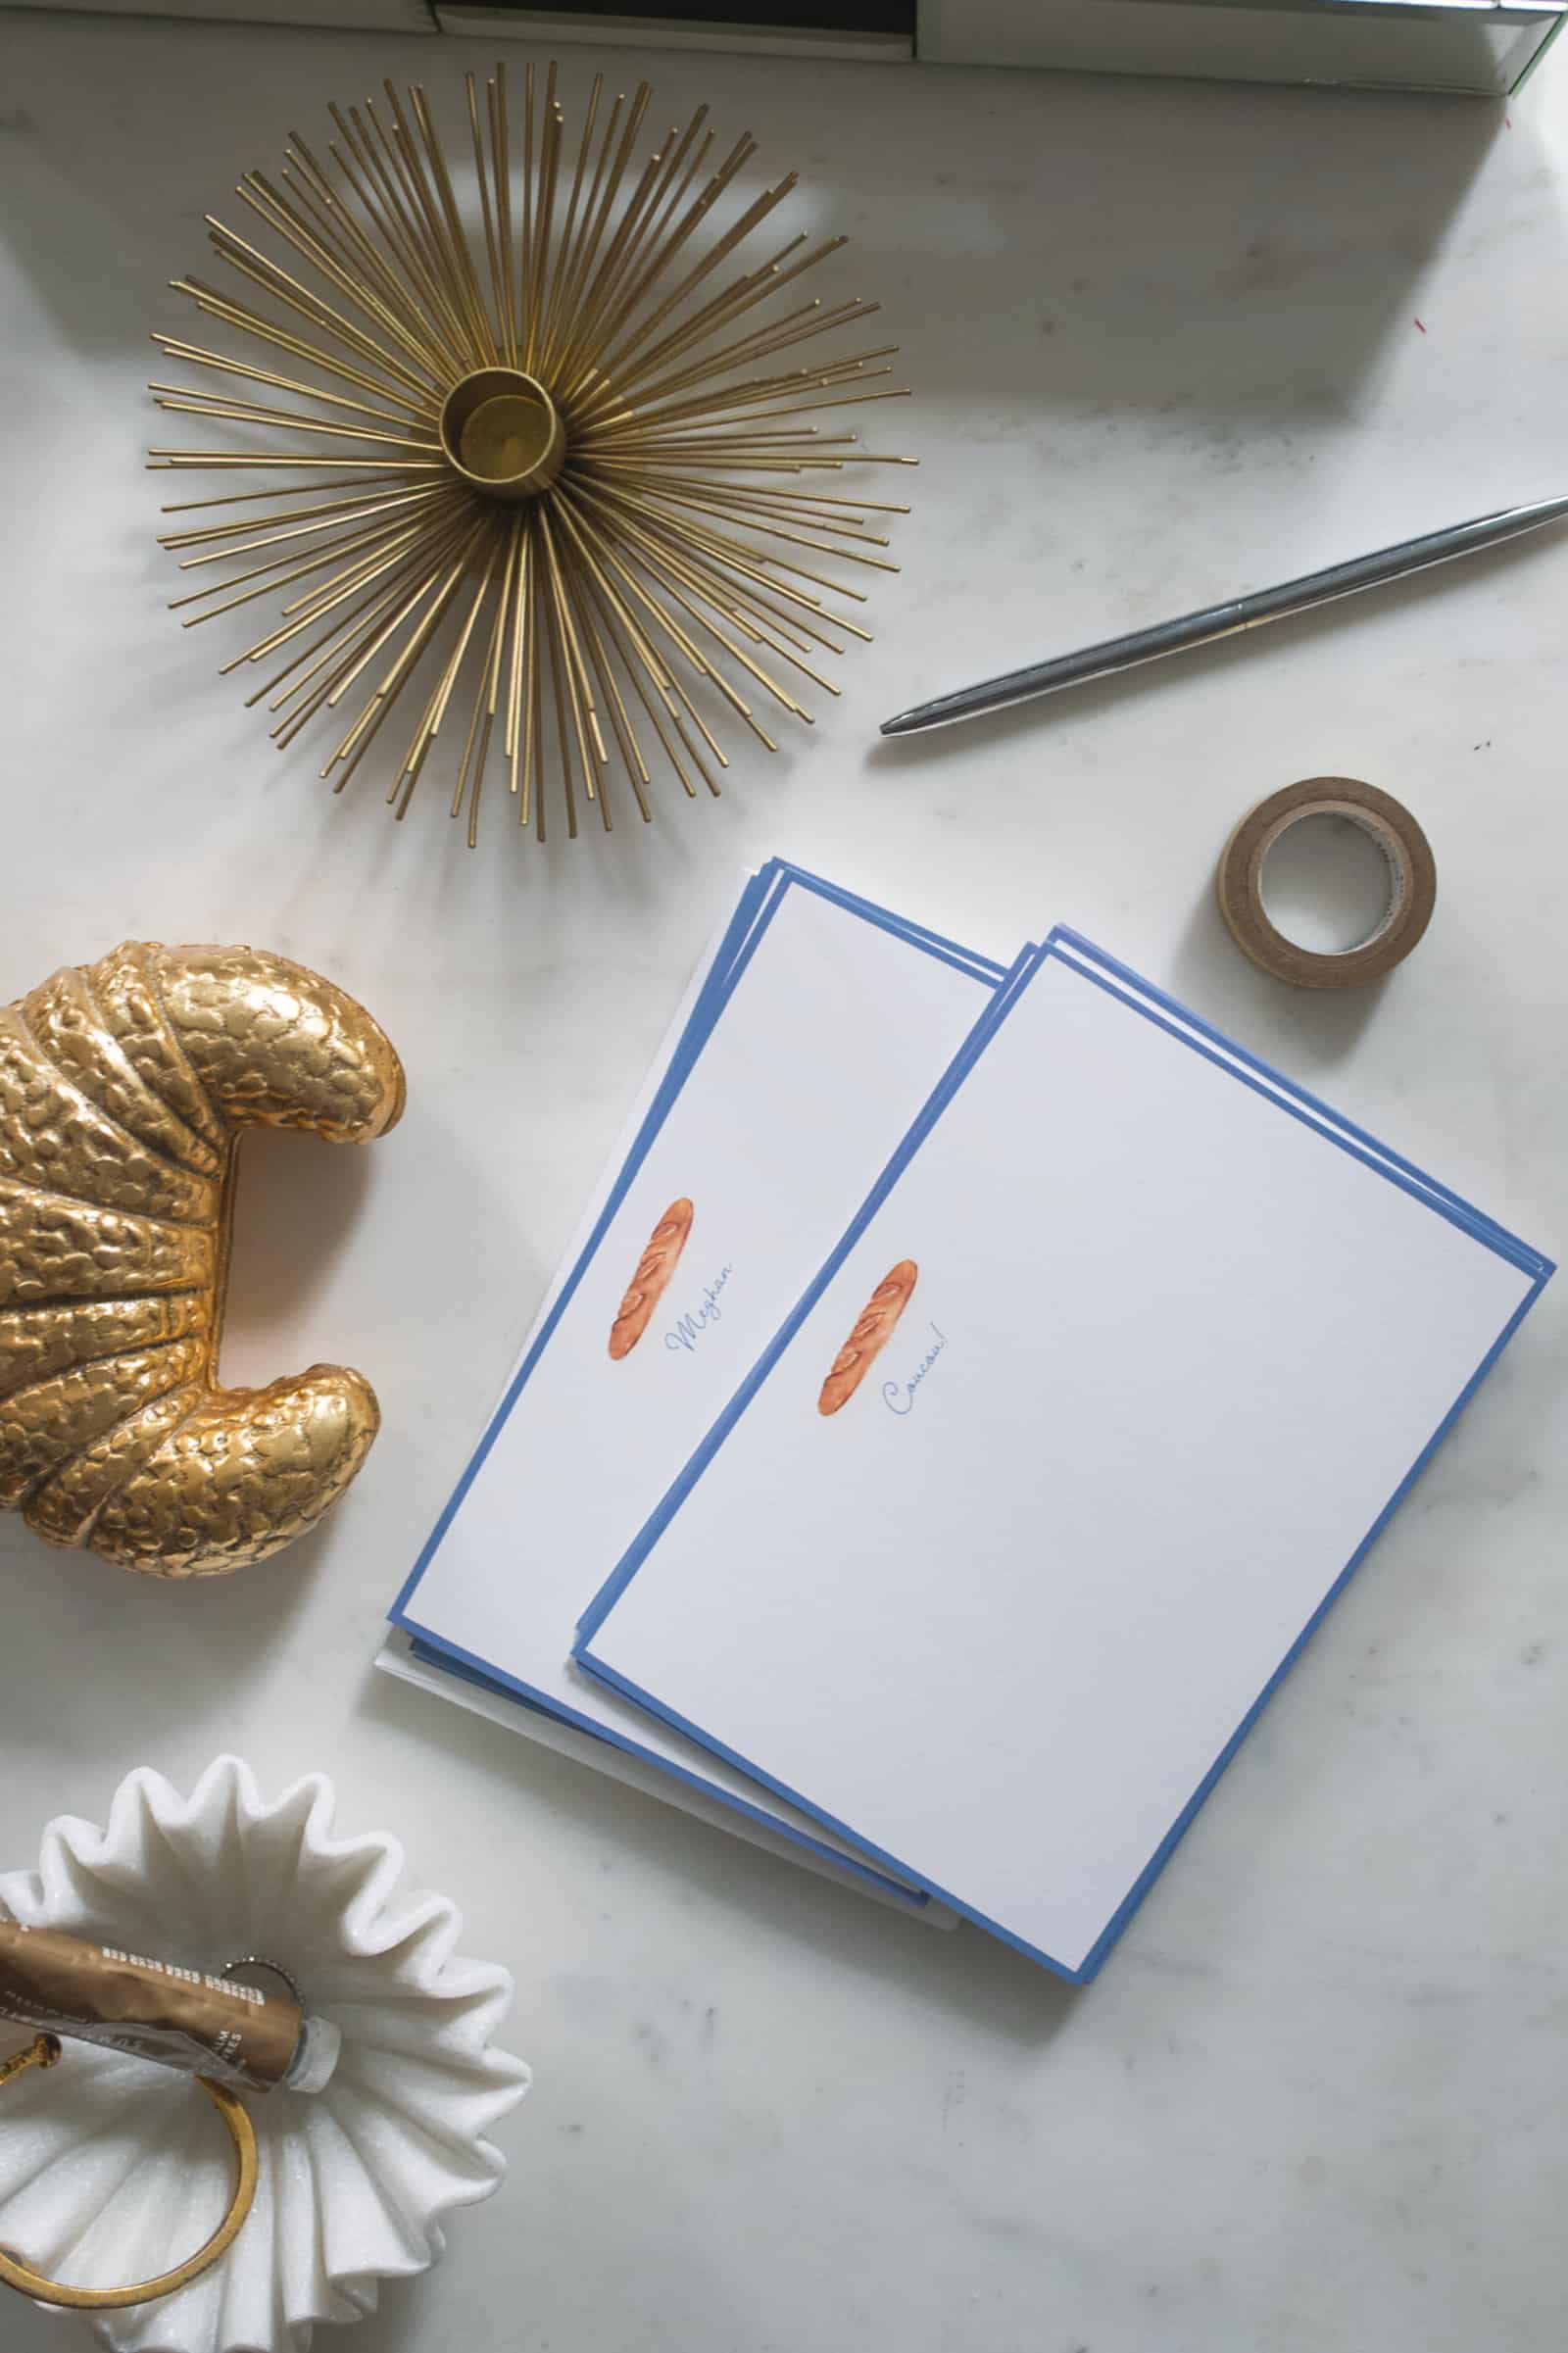 wit & whimsy x The Illustrated Life Baguette Stationery